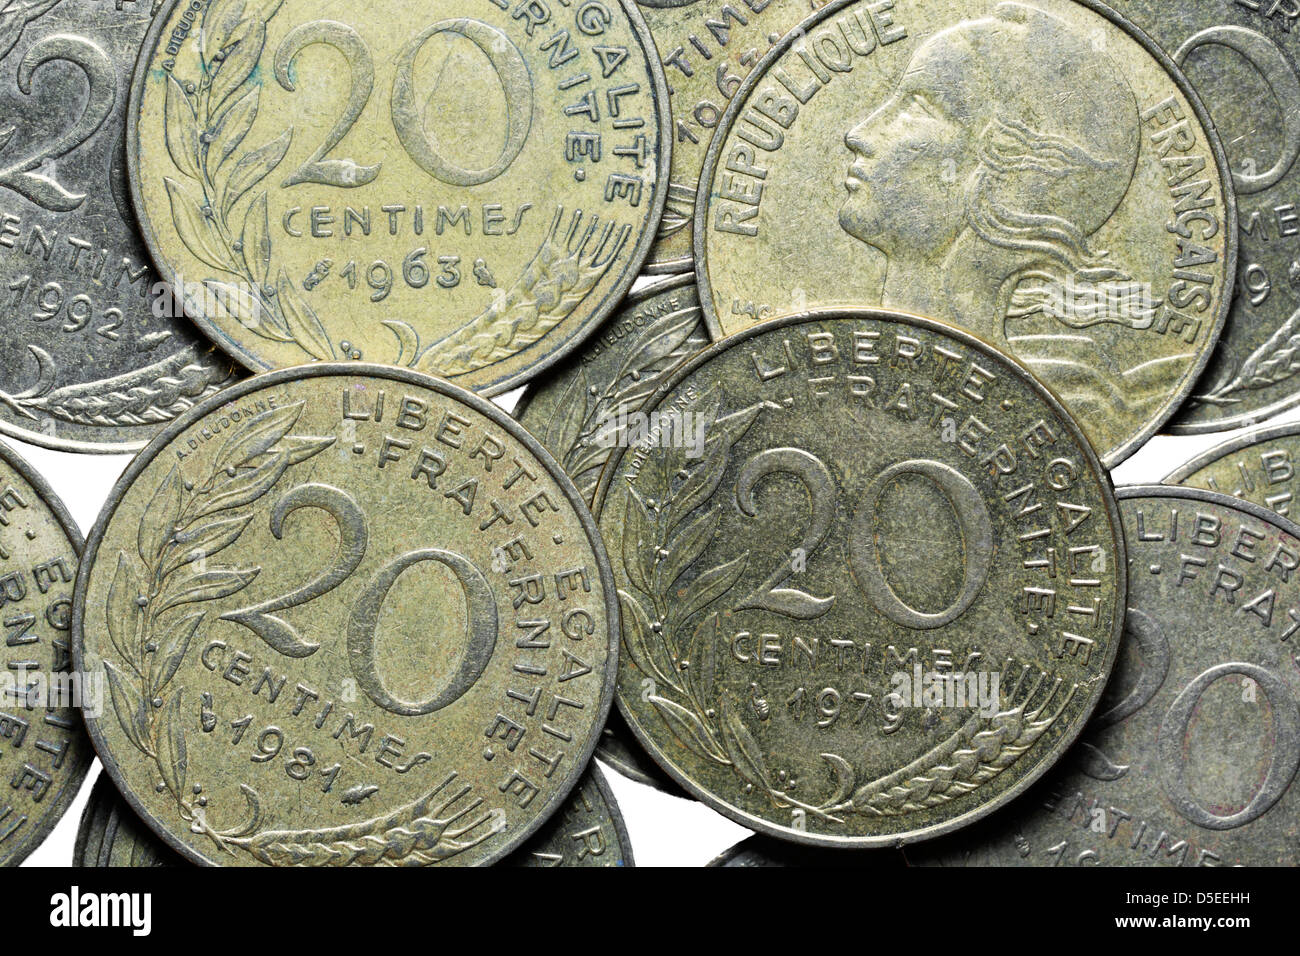 Pile of French 20 centimes coins, France Stock Photo